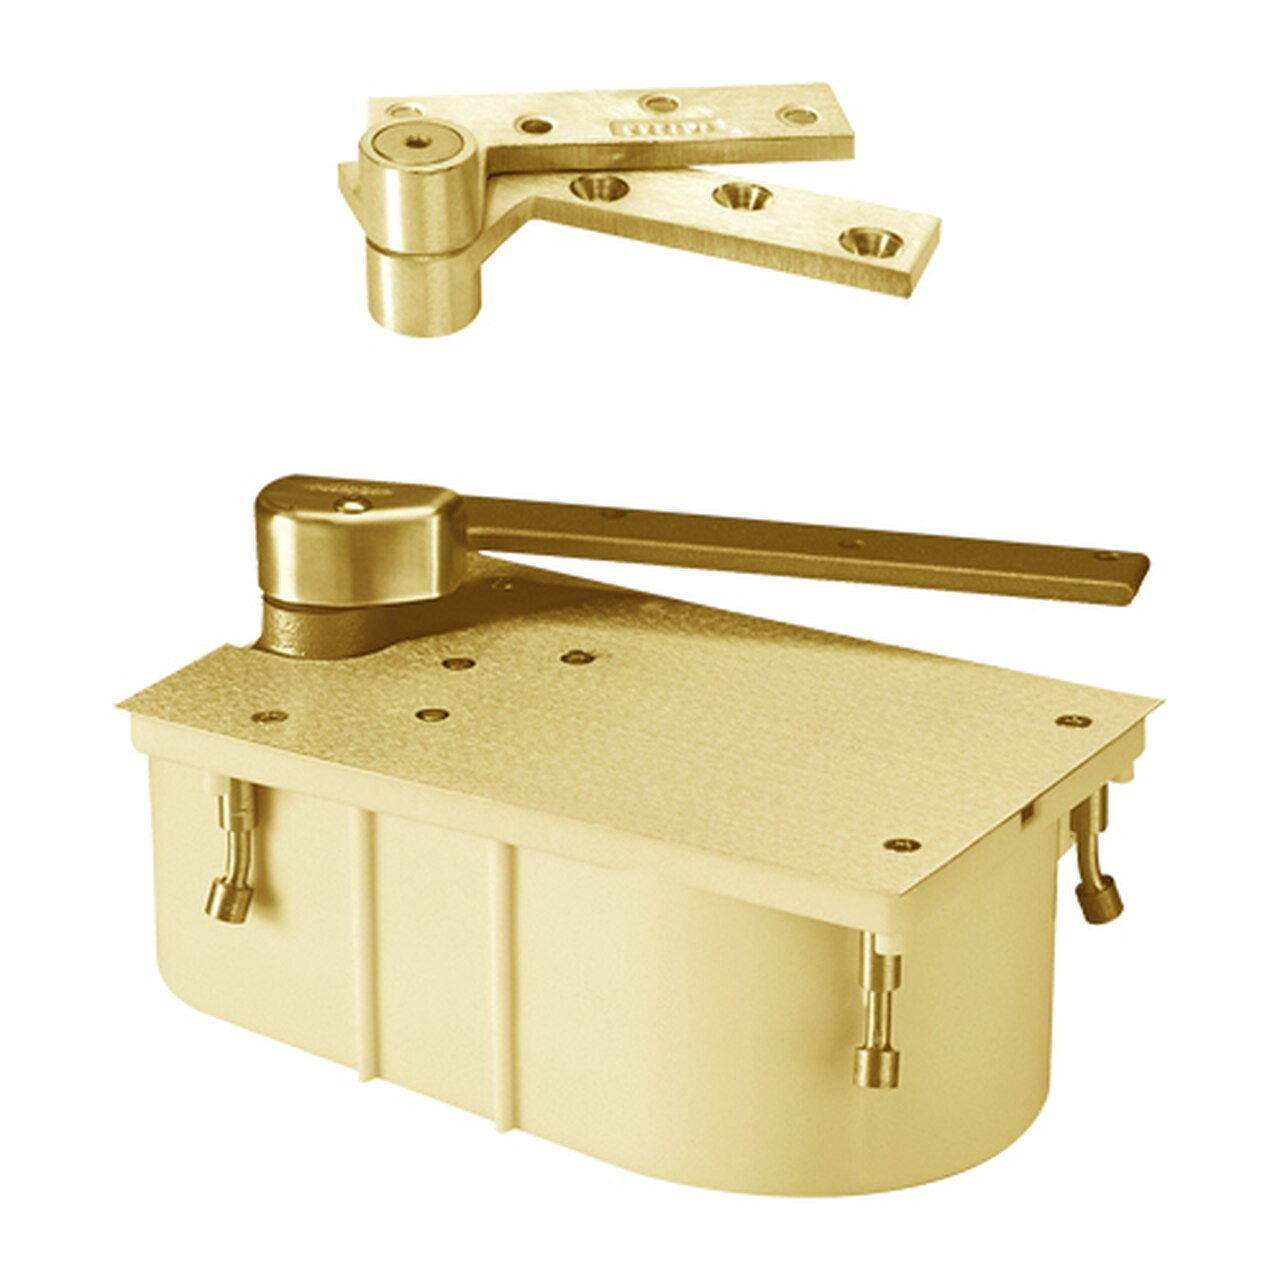 F27-90N-LFP-LCC-LH-605 Rixson 27 Series Fire Rated Heavy Duty 3/4" Offset Hung Floor Closer in Bright Brass Finish